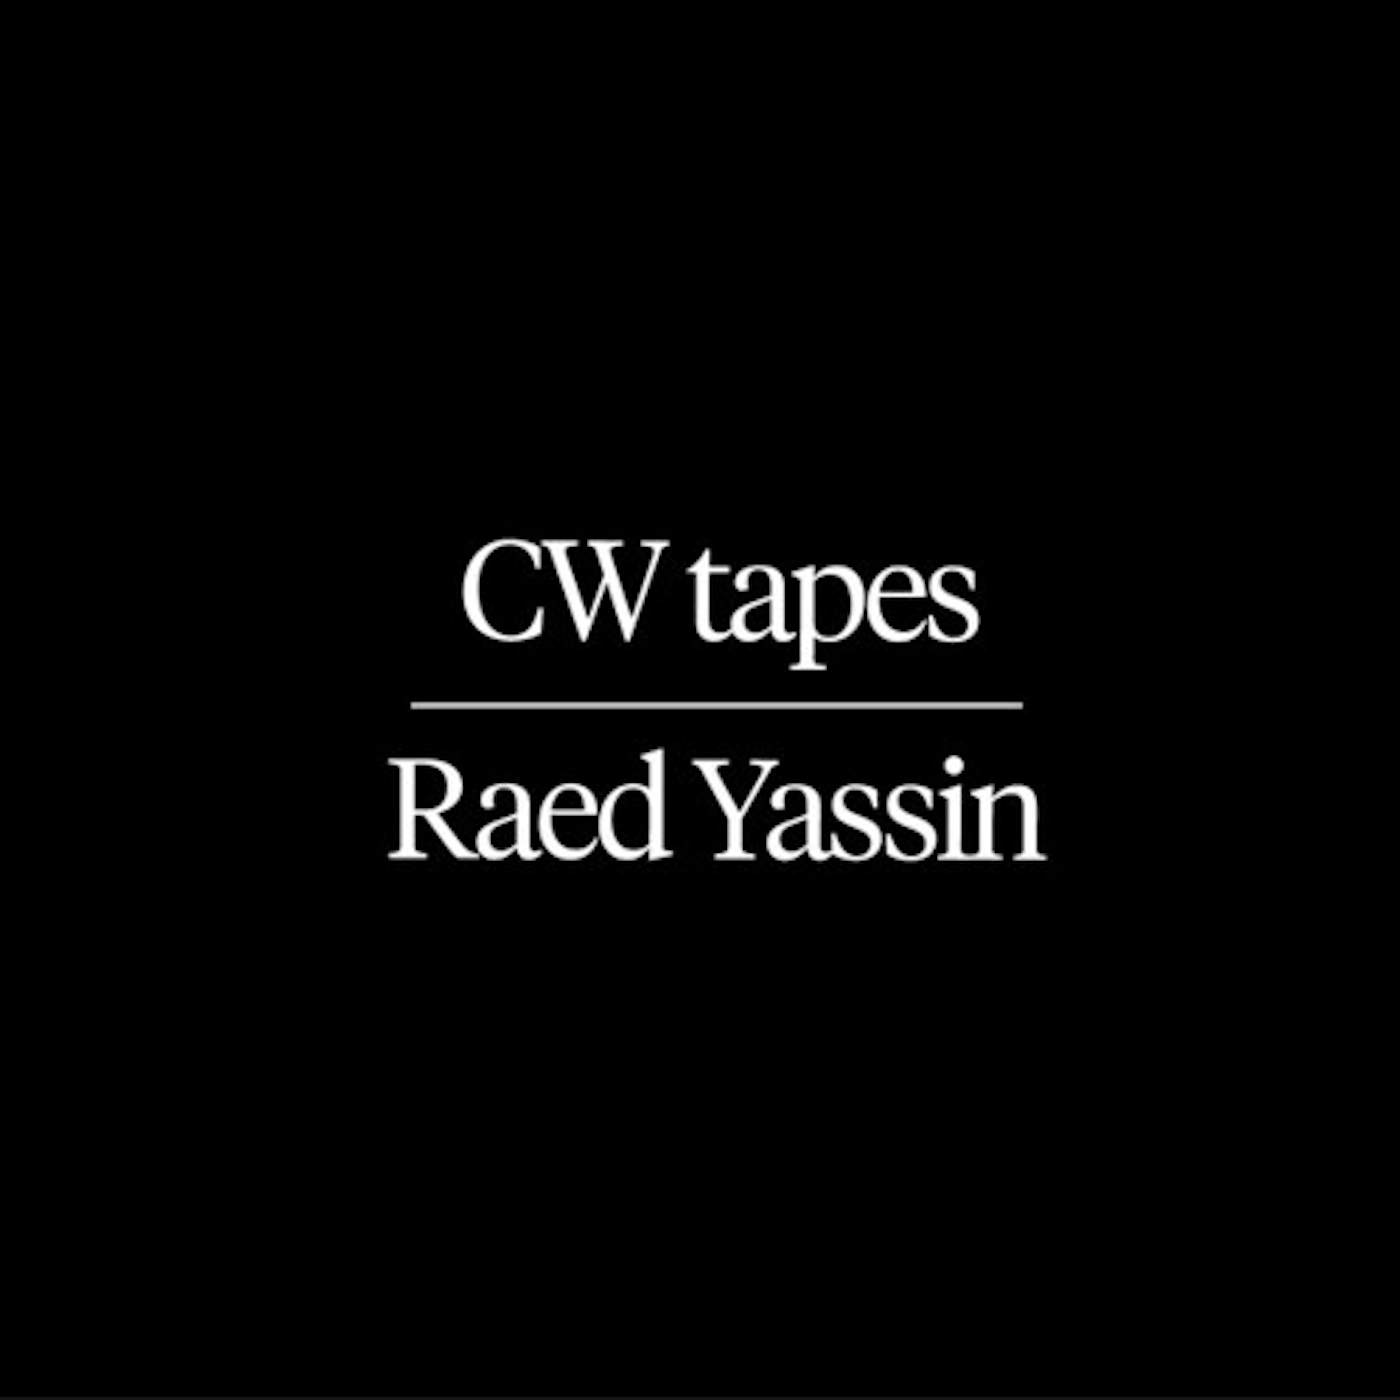 Raed Yassin CW Tapes Vinyl Record